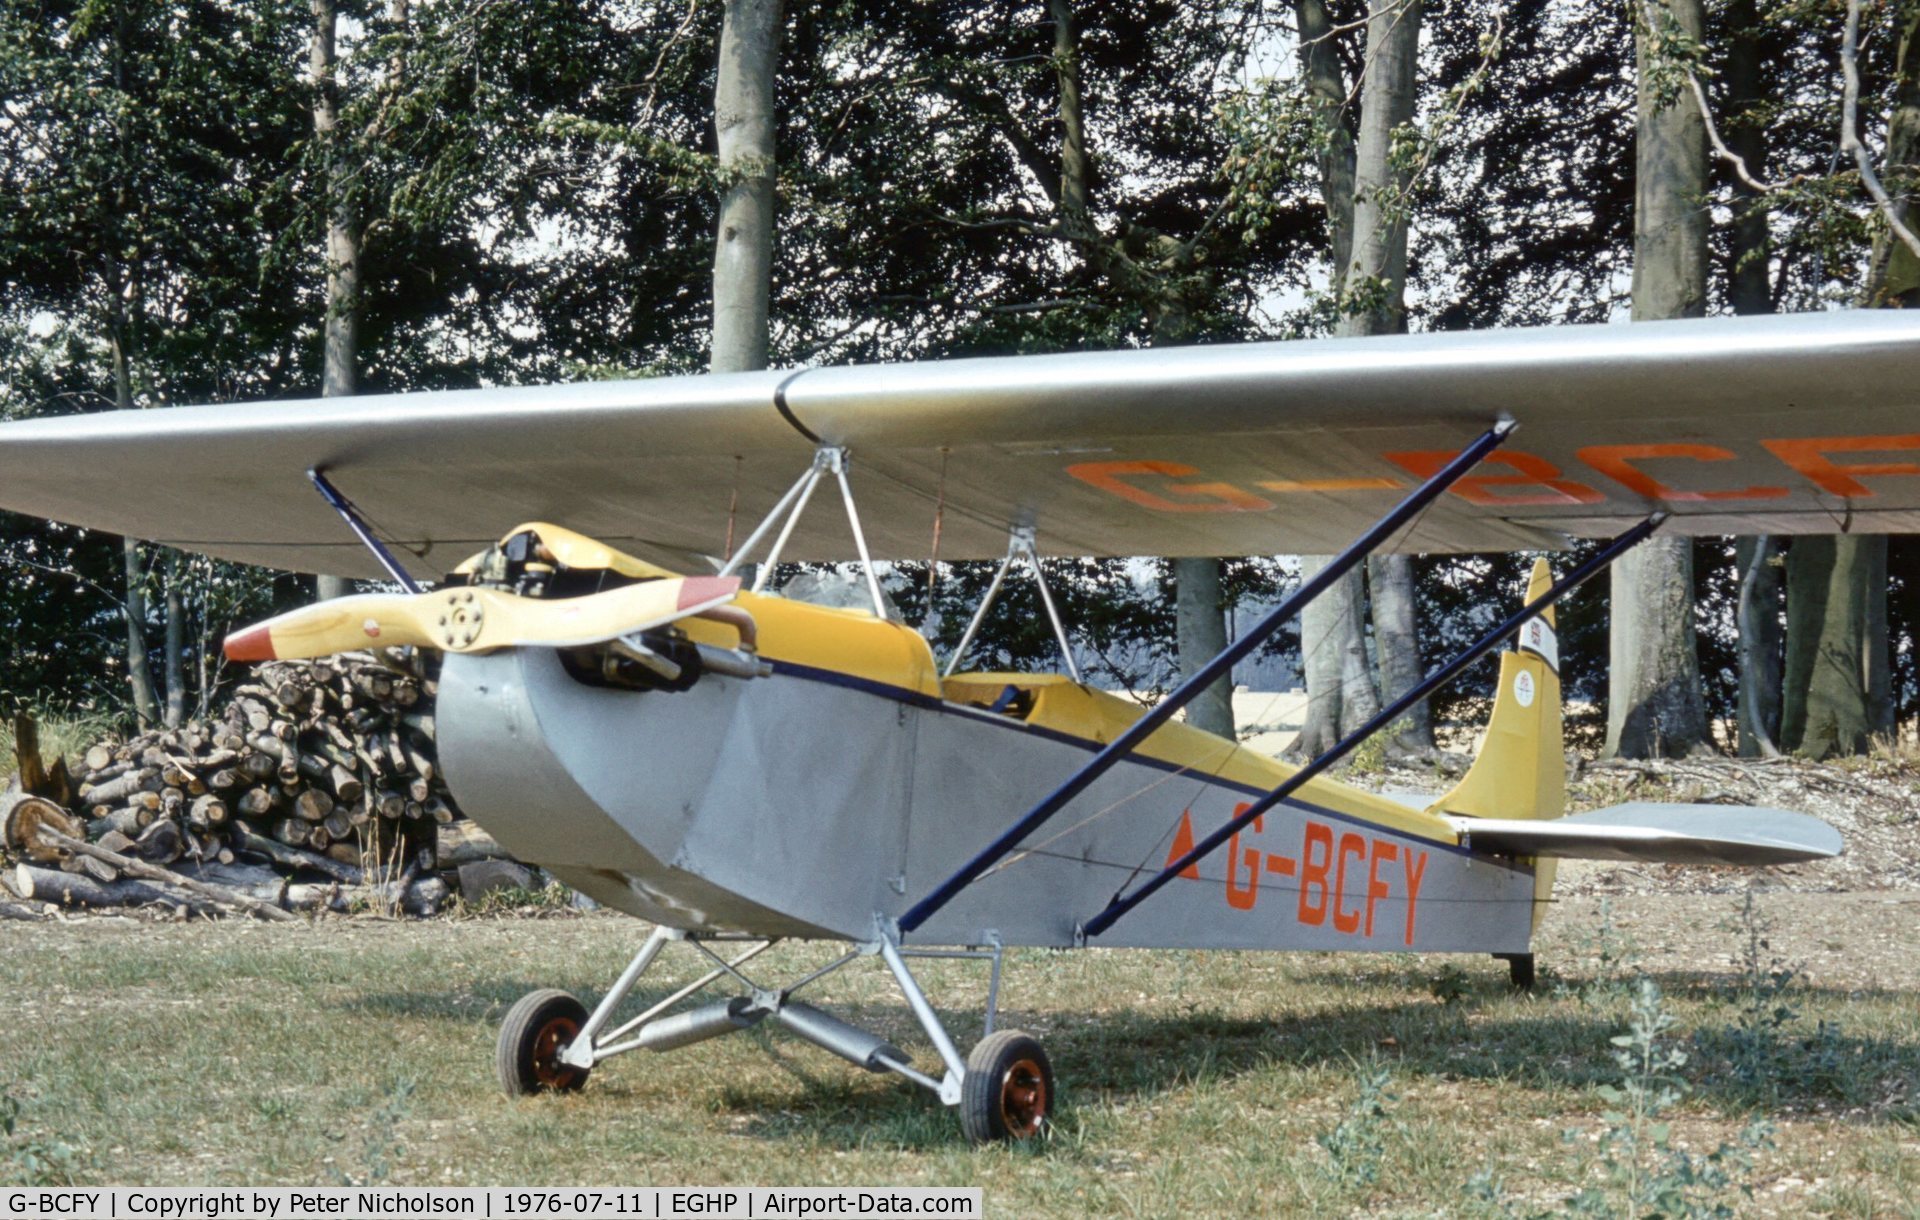 G-BCFY, 1975 Luton LA-4A Minor C/N PFA 824, This Luton Minor was displayed at the 1976 Popham Fly-In.